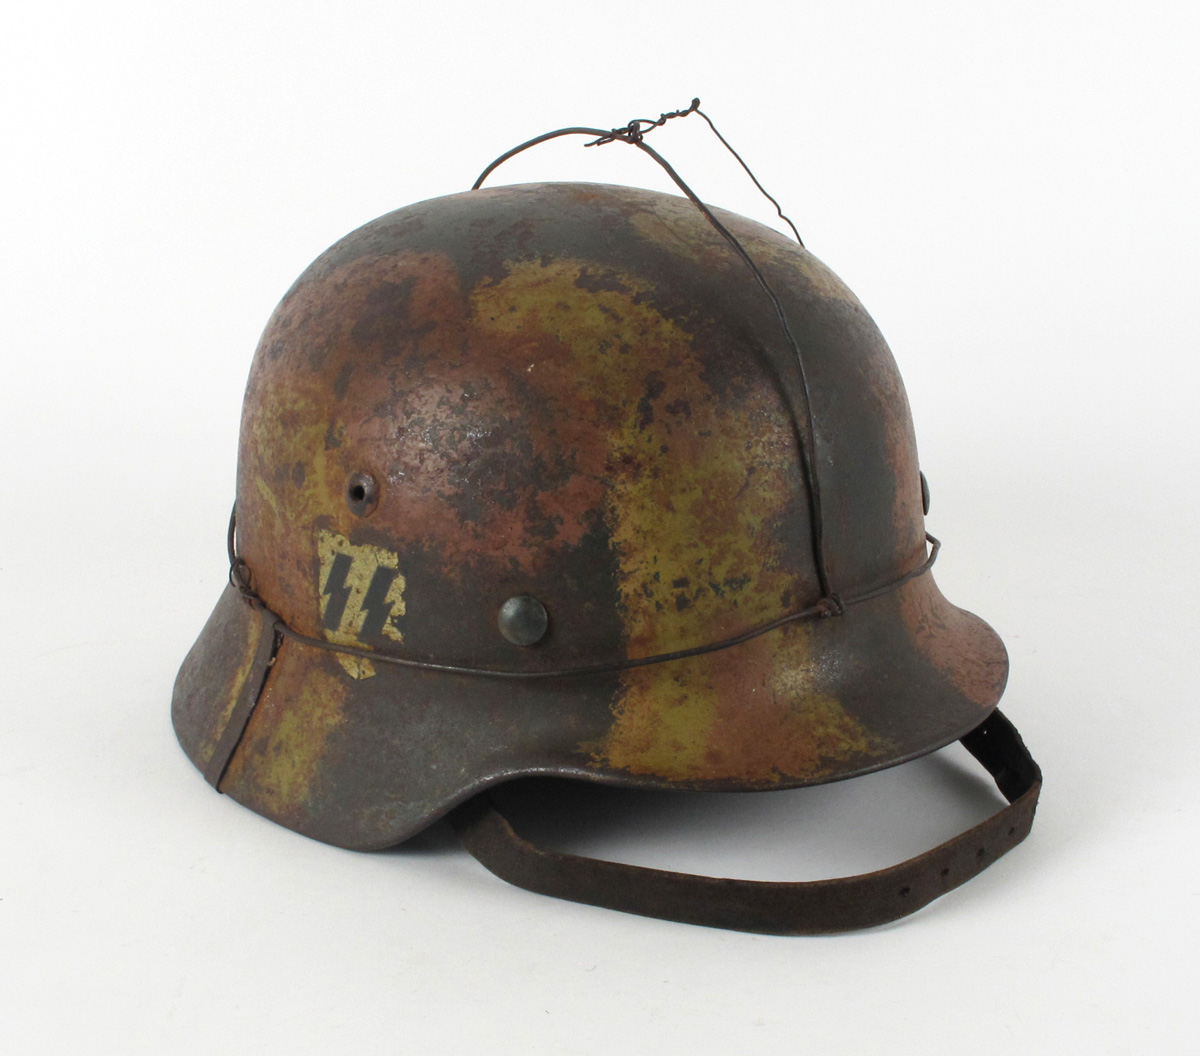 1939 - 1945 German SS single decal camouflage helmet. at Whyte's Auctions